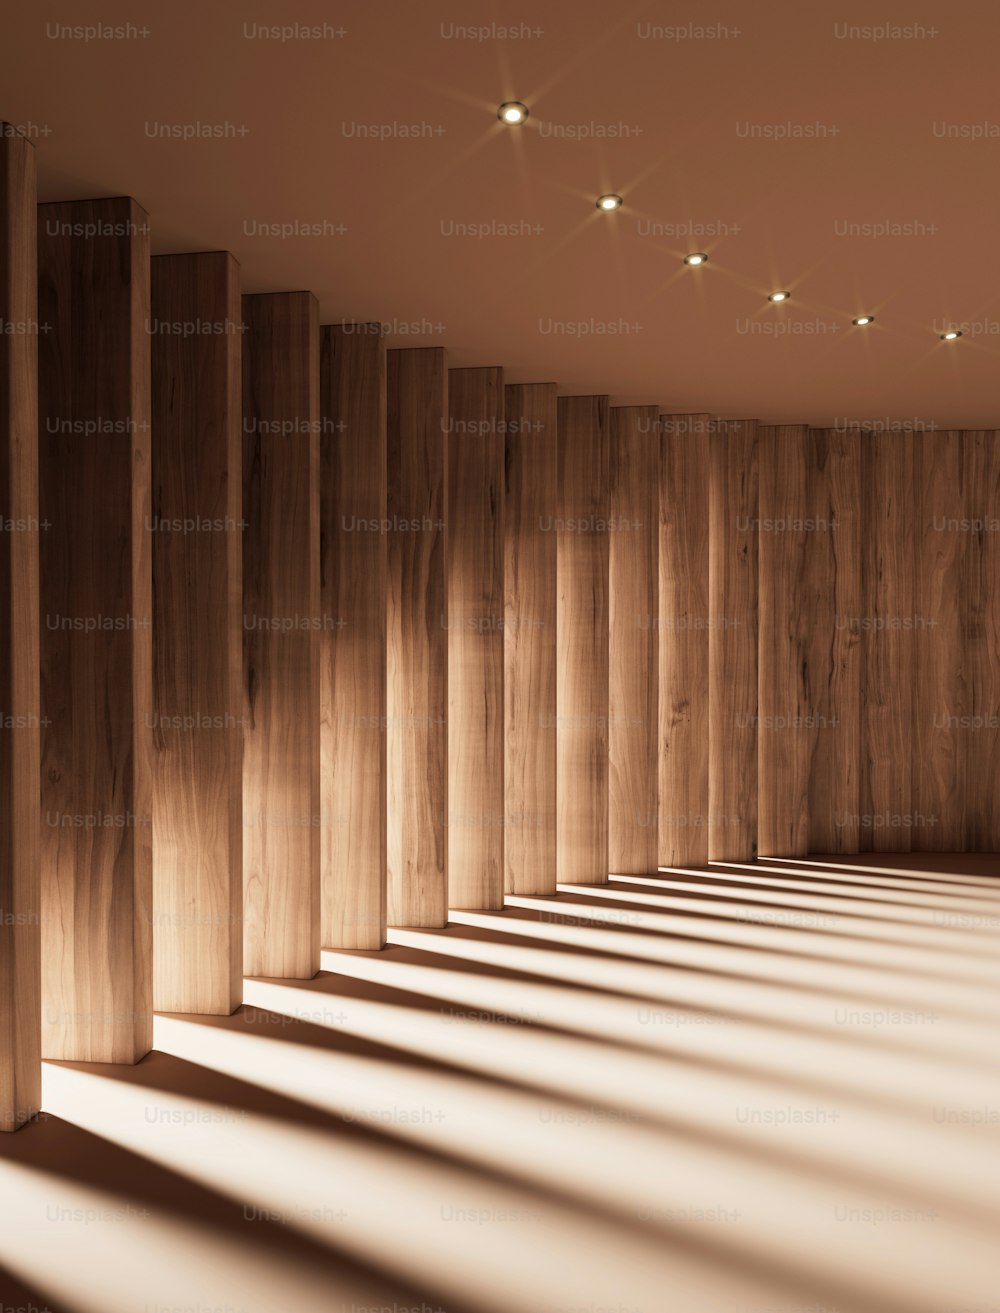 a long row of wooden columns in a room